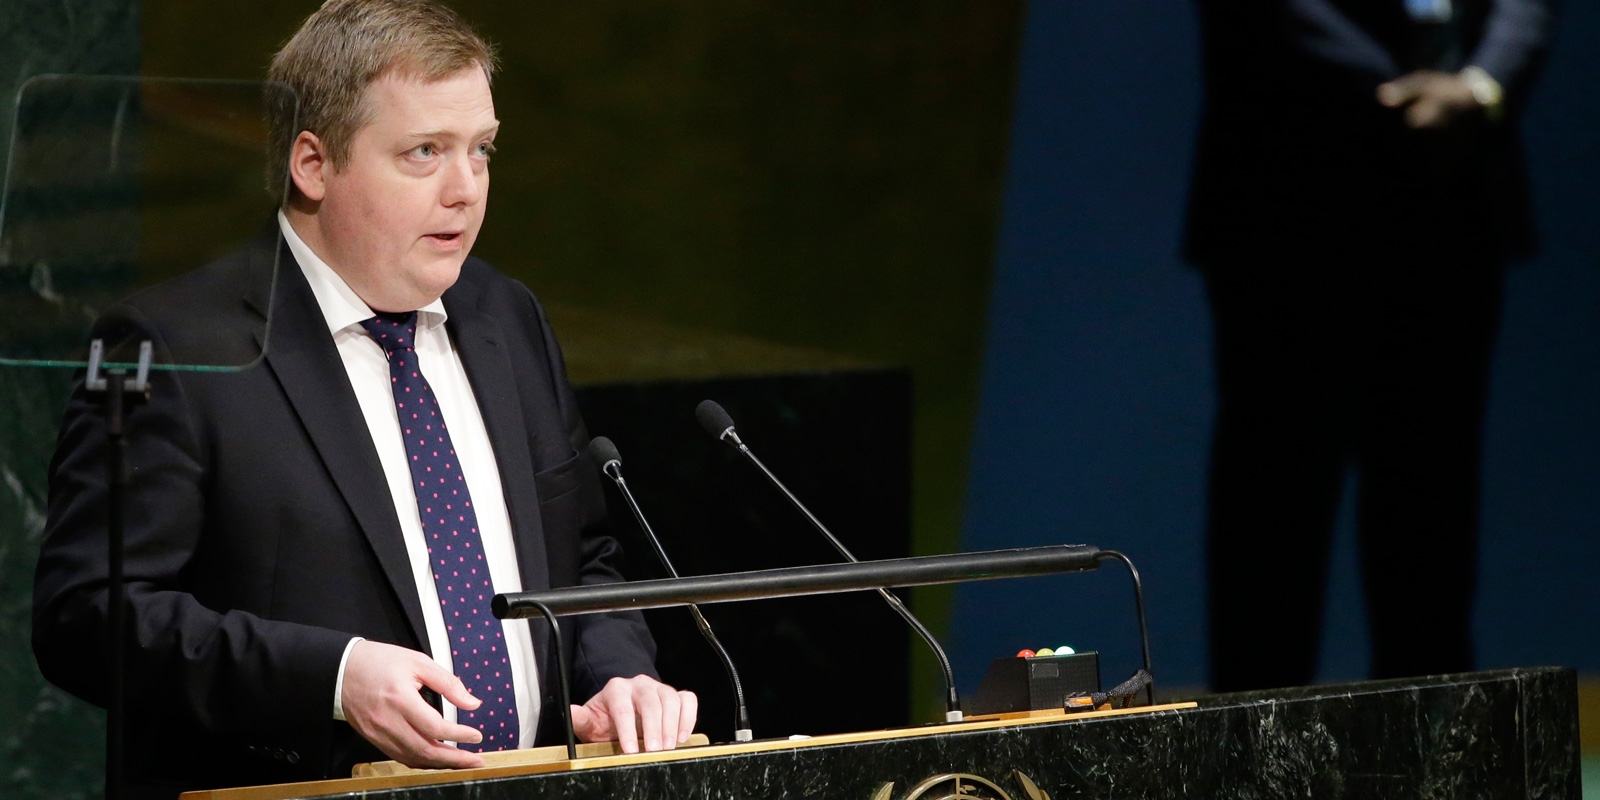 Iceland’s Prime Minister Ducks Question But the Answer Catches Up with Him